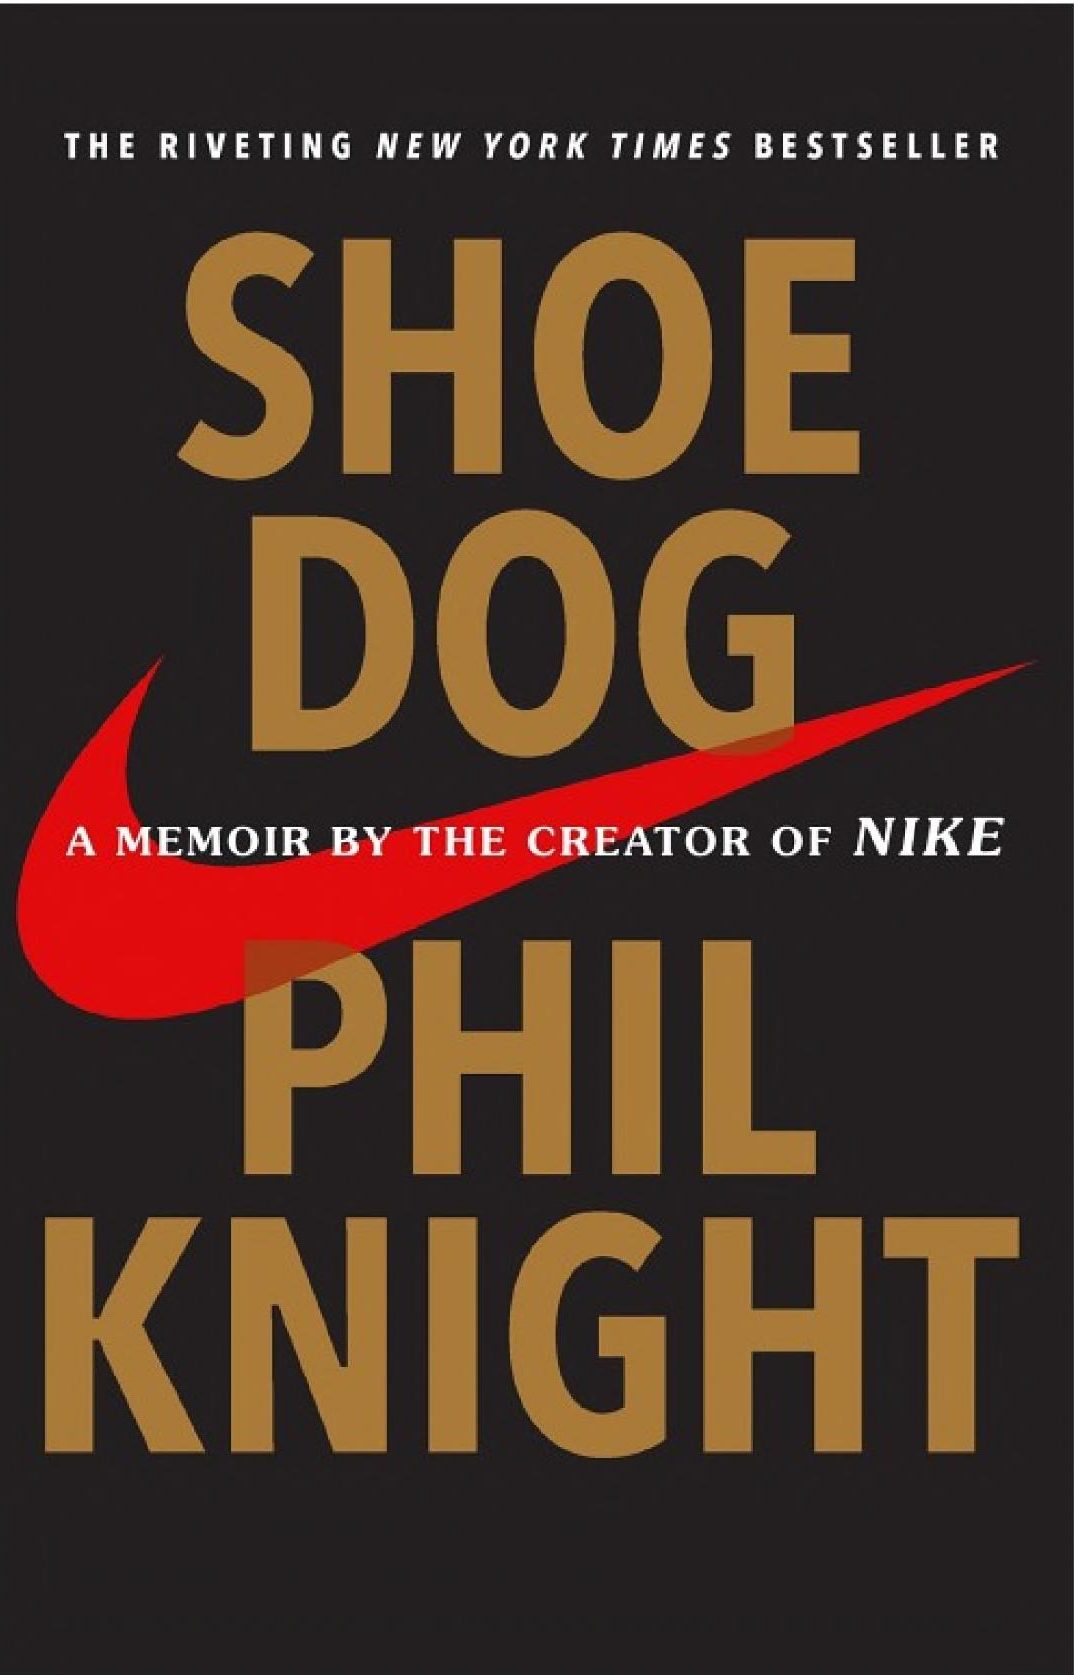 Shoe Dog- A Memoir by the Creator of Nike by Phil Knight